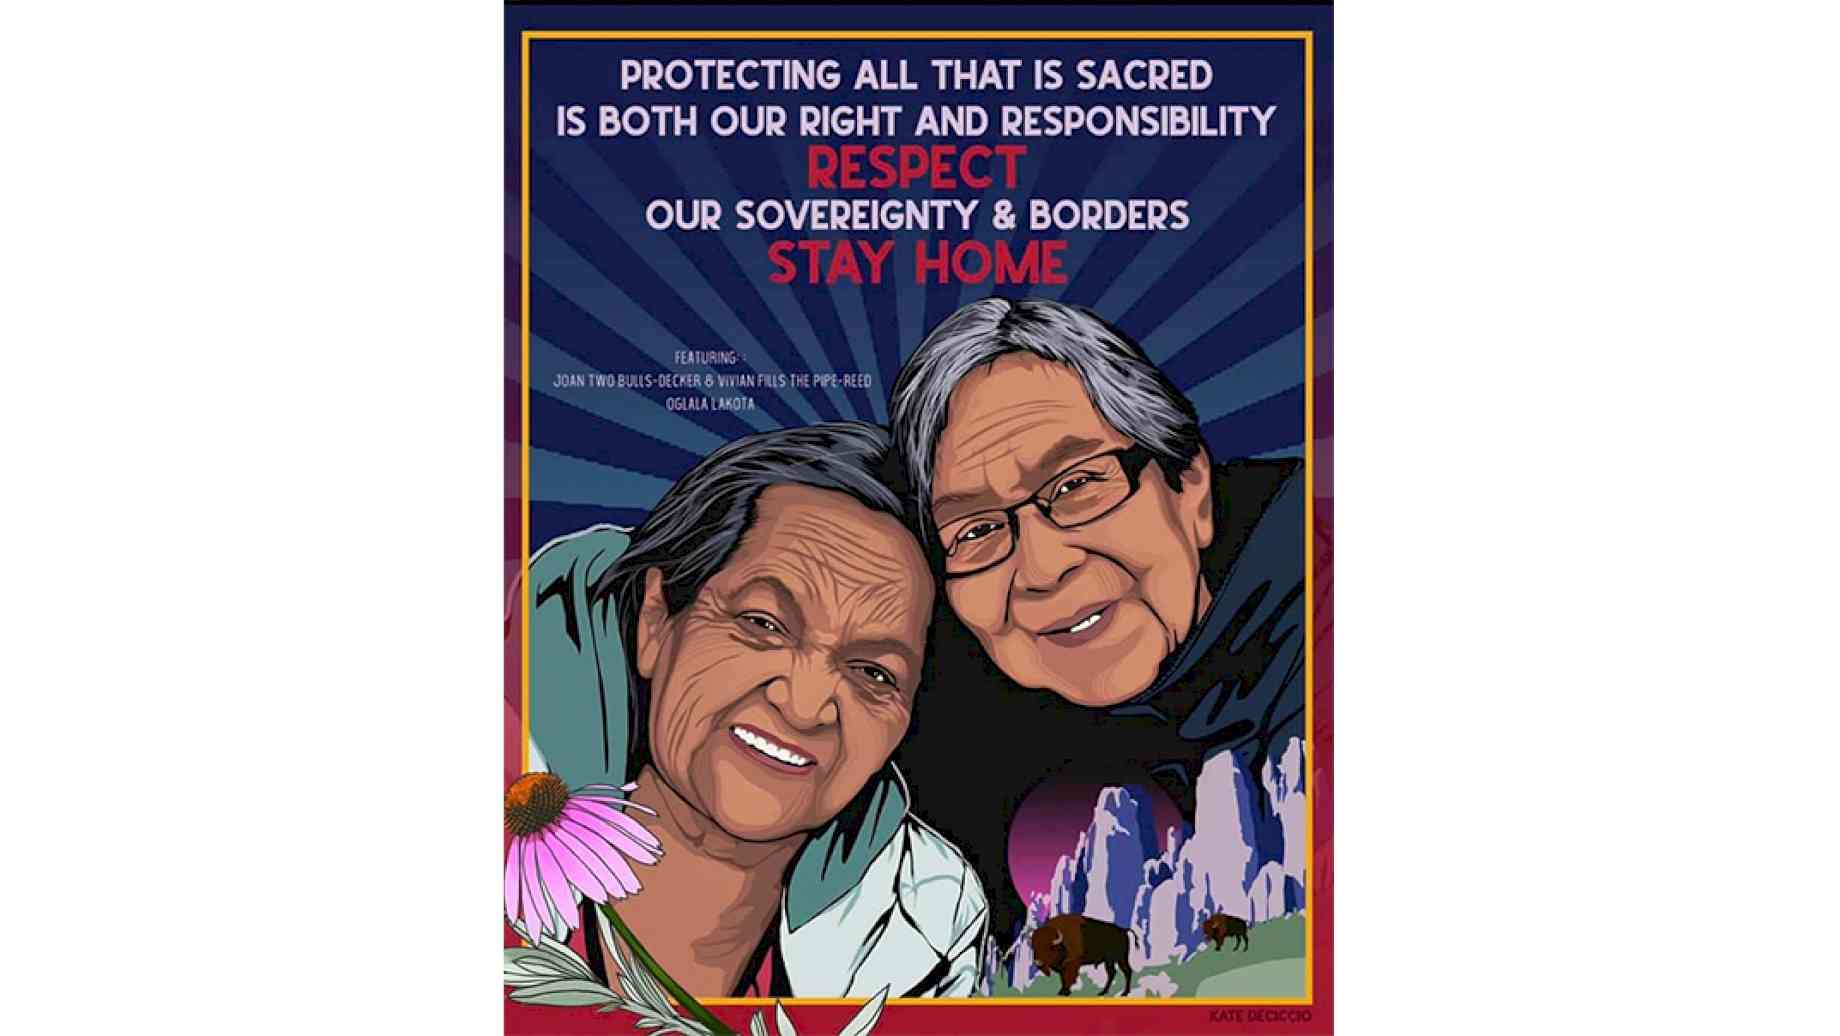 A digital poster of two indigenous elders embracing over a mountainous landscape with Buffalo. Light and dark blue stripes radiate out behind them like the rays of the sun. The words "Protecting all that is sacred is both our right a responsibility, RESPECT our sovereignty and borders, STAY HOME" hover at the top of the image.